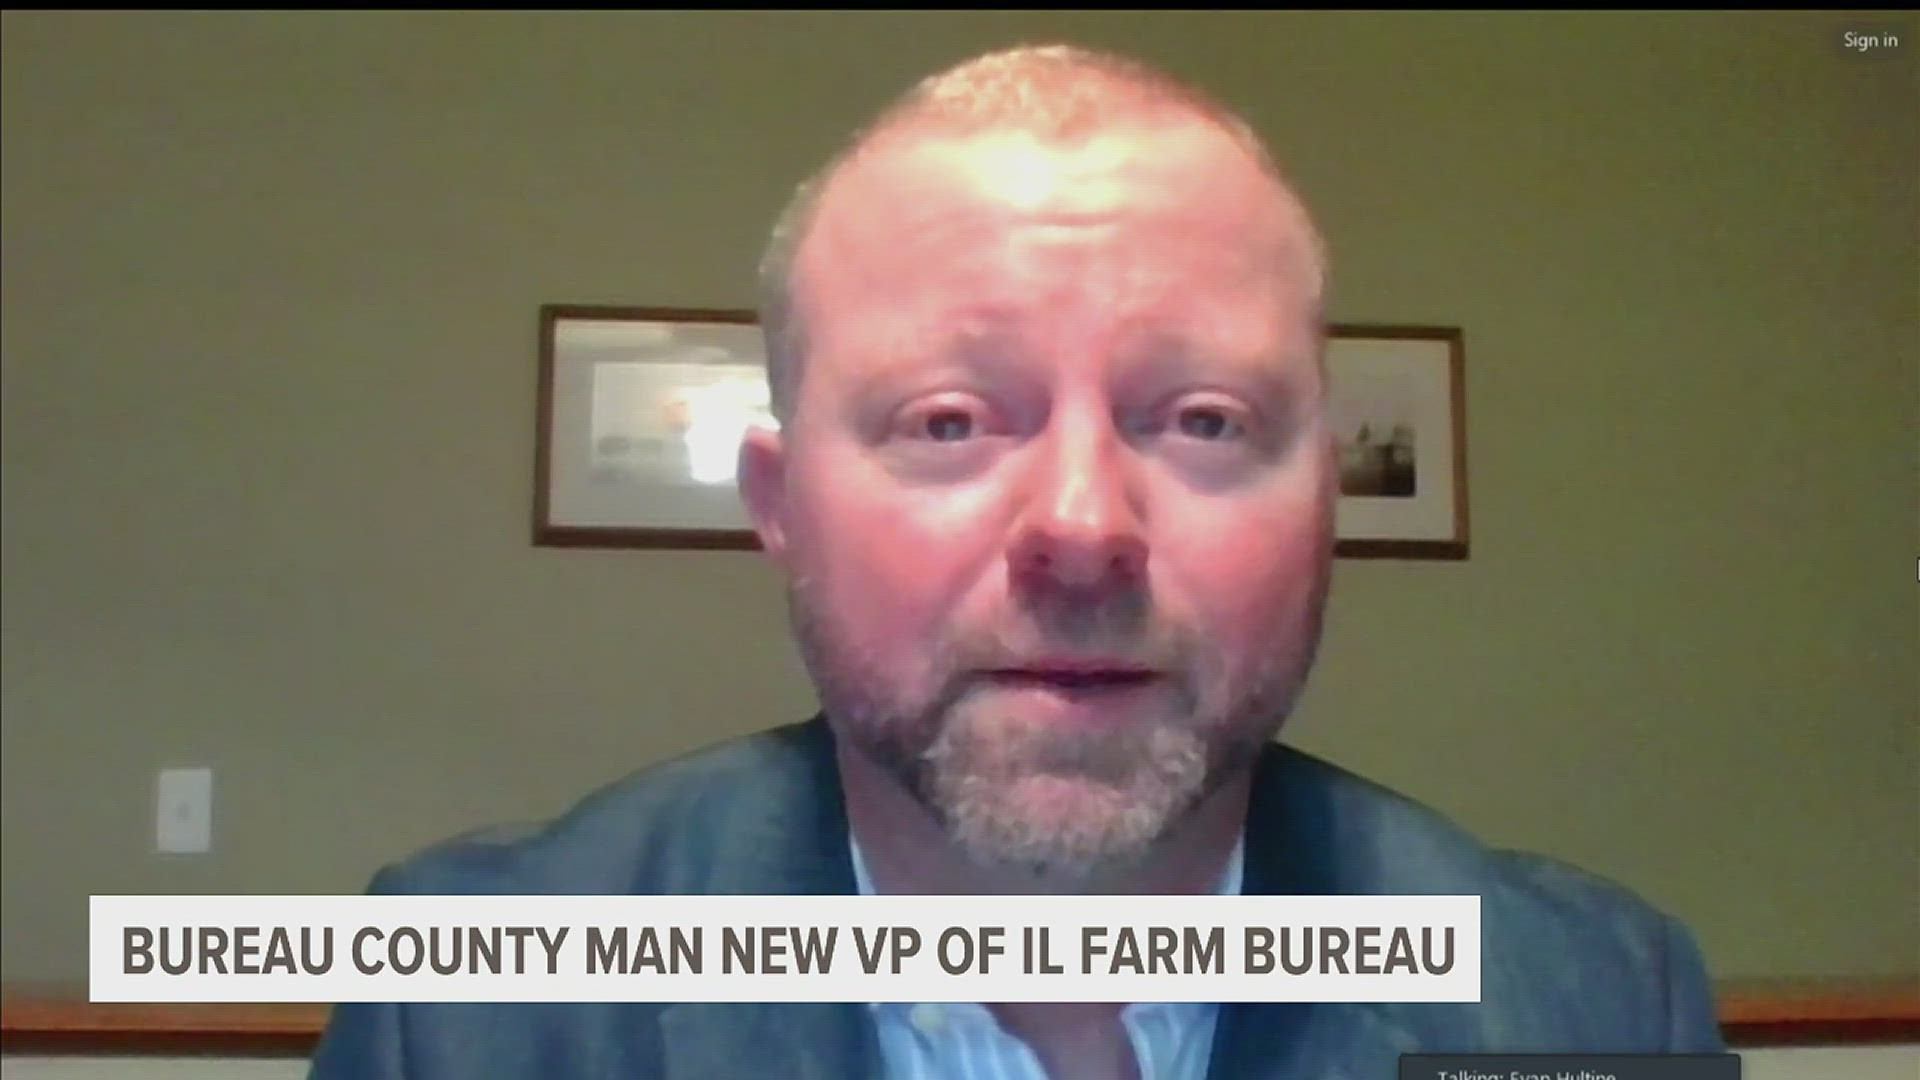 Evan Hultine has been Bureau County Farm Bureau's president since 2017. Now as ILFB's VP, he wants to uplift younger farmers and better engage experienced voices.